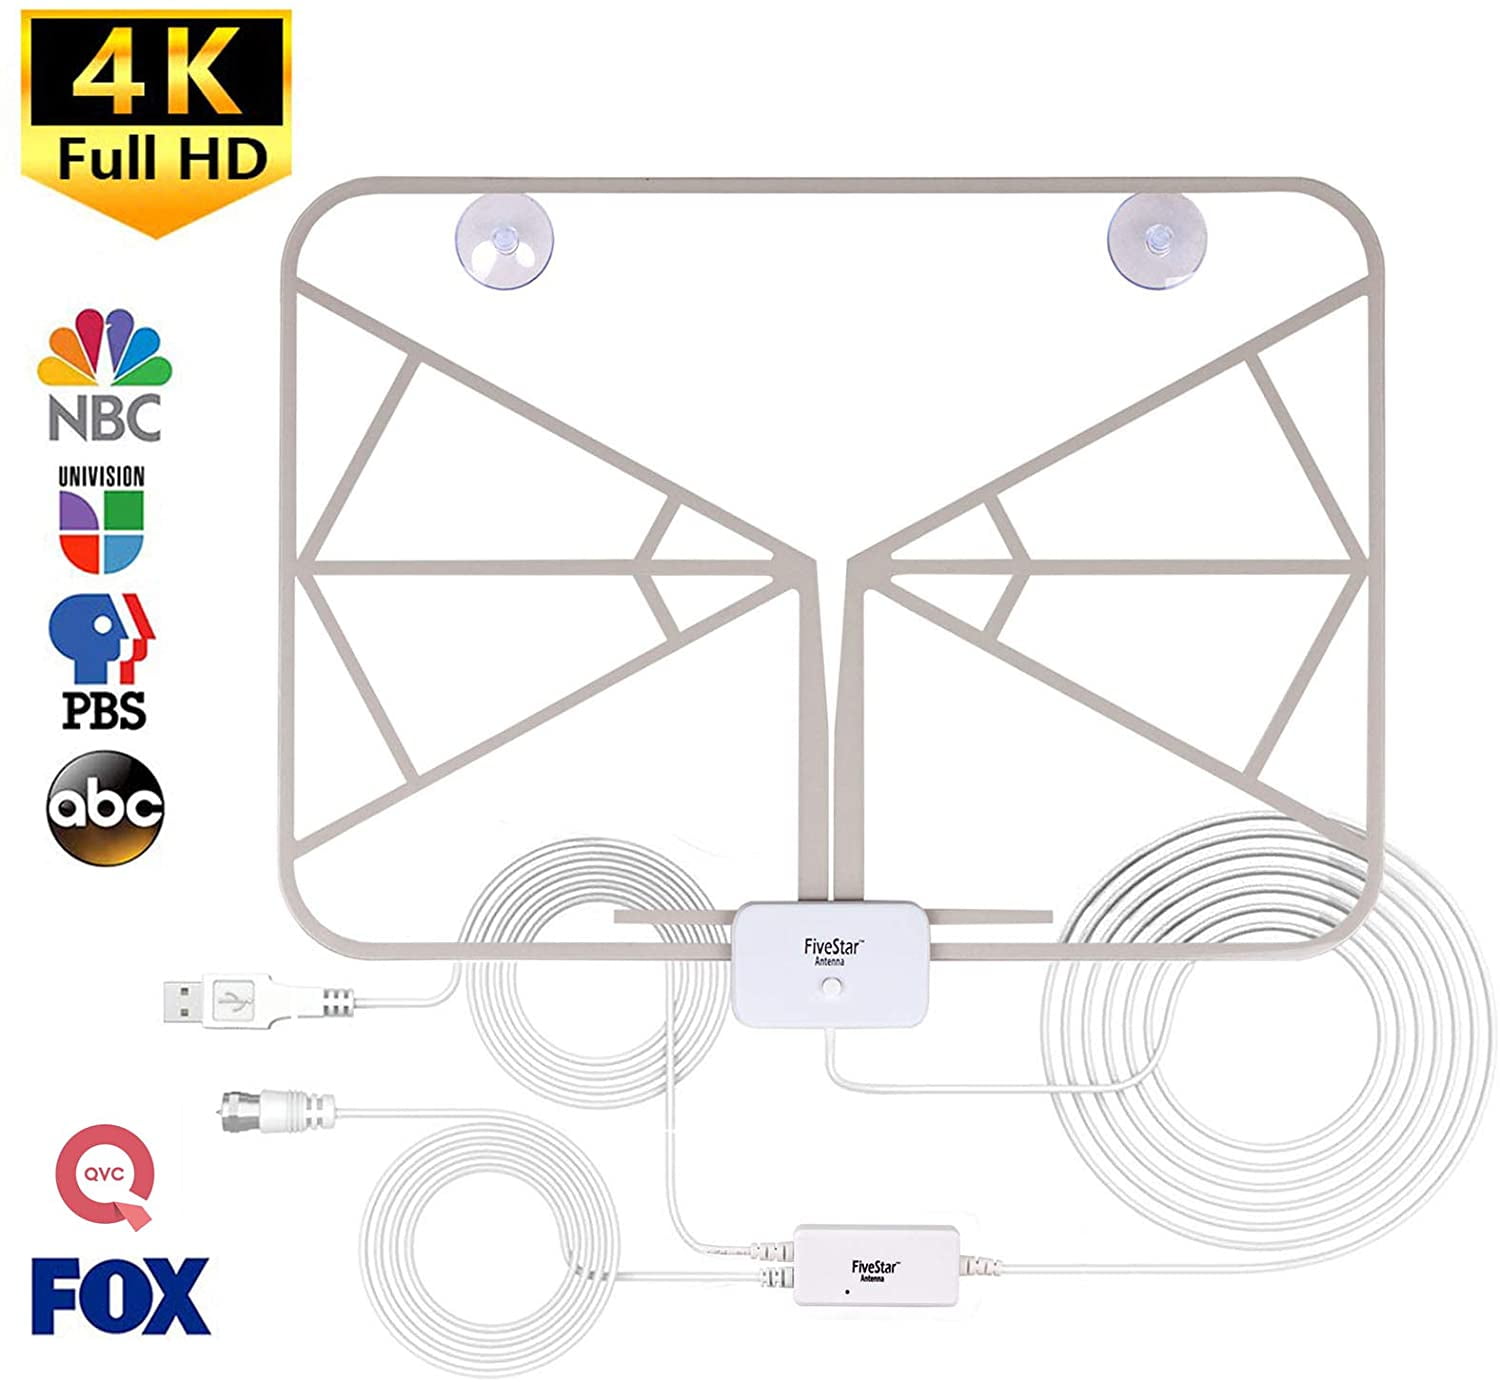 Five Star Amplified HD Tv Indoor Antenna 100 range - Support 4K 1080p Tv Stick HDTV with AC FCC Adapter